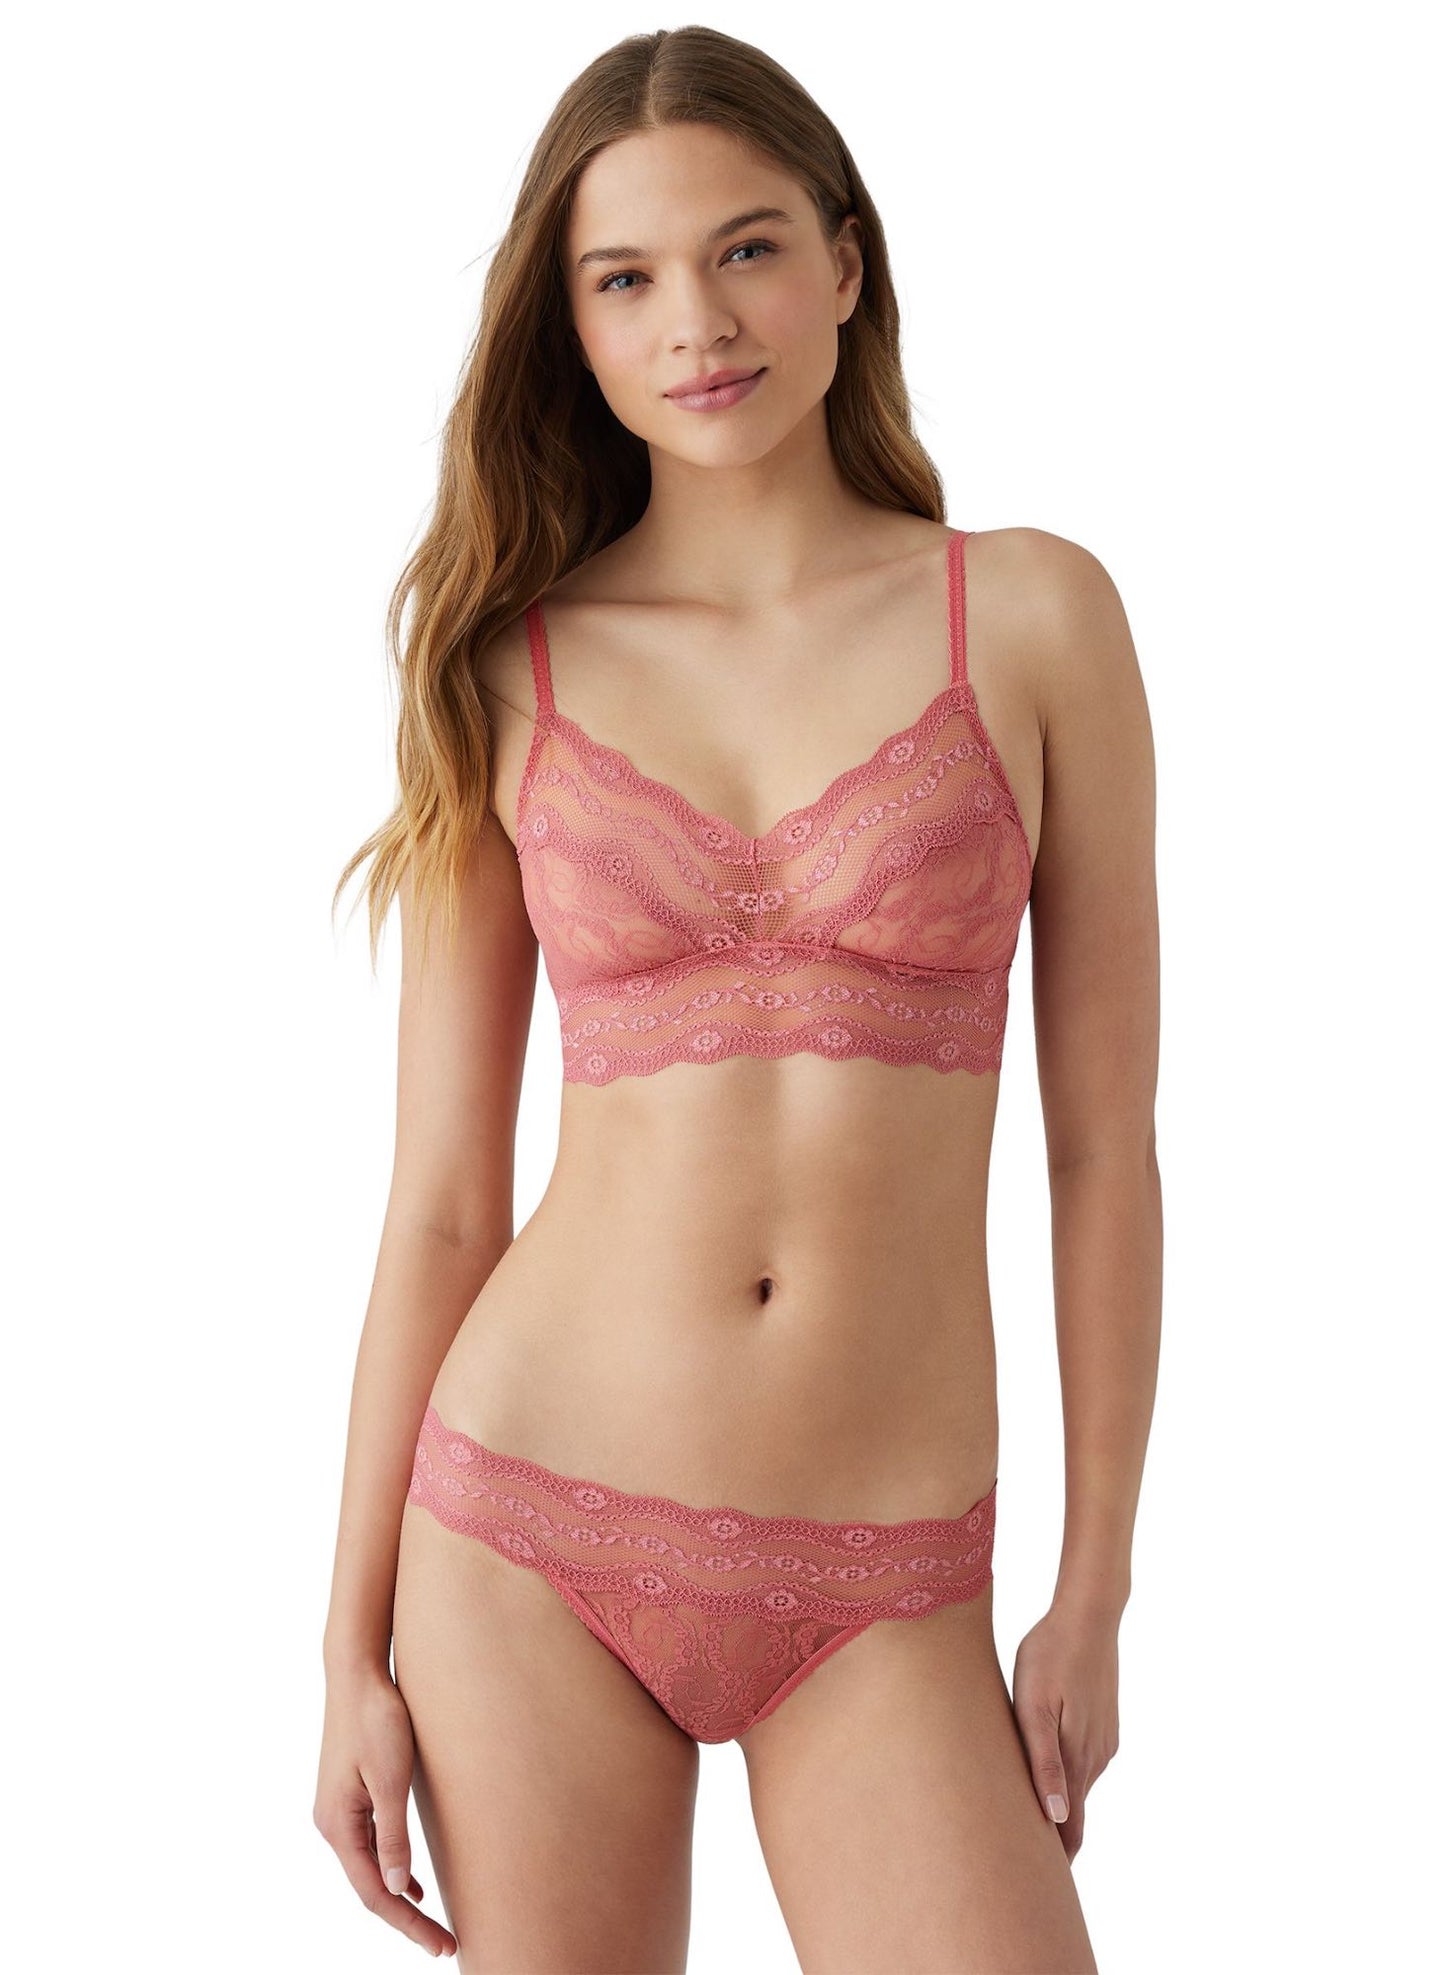 Lace Kiss bralette - new early fall color